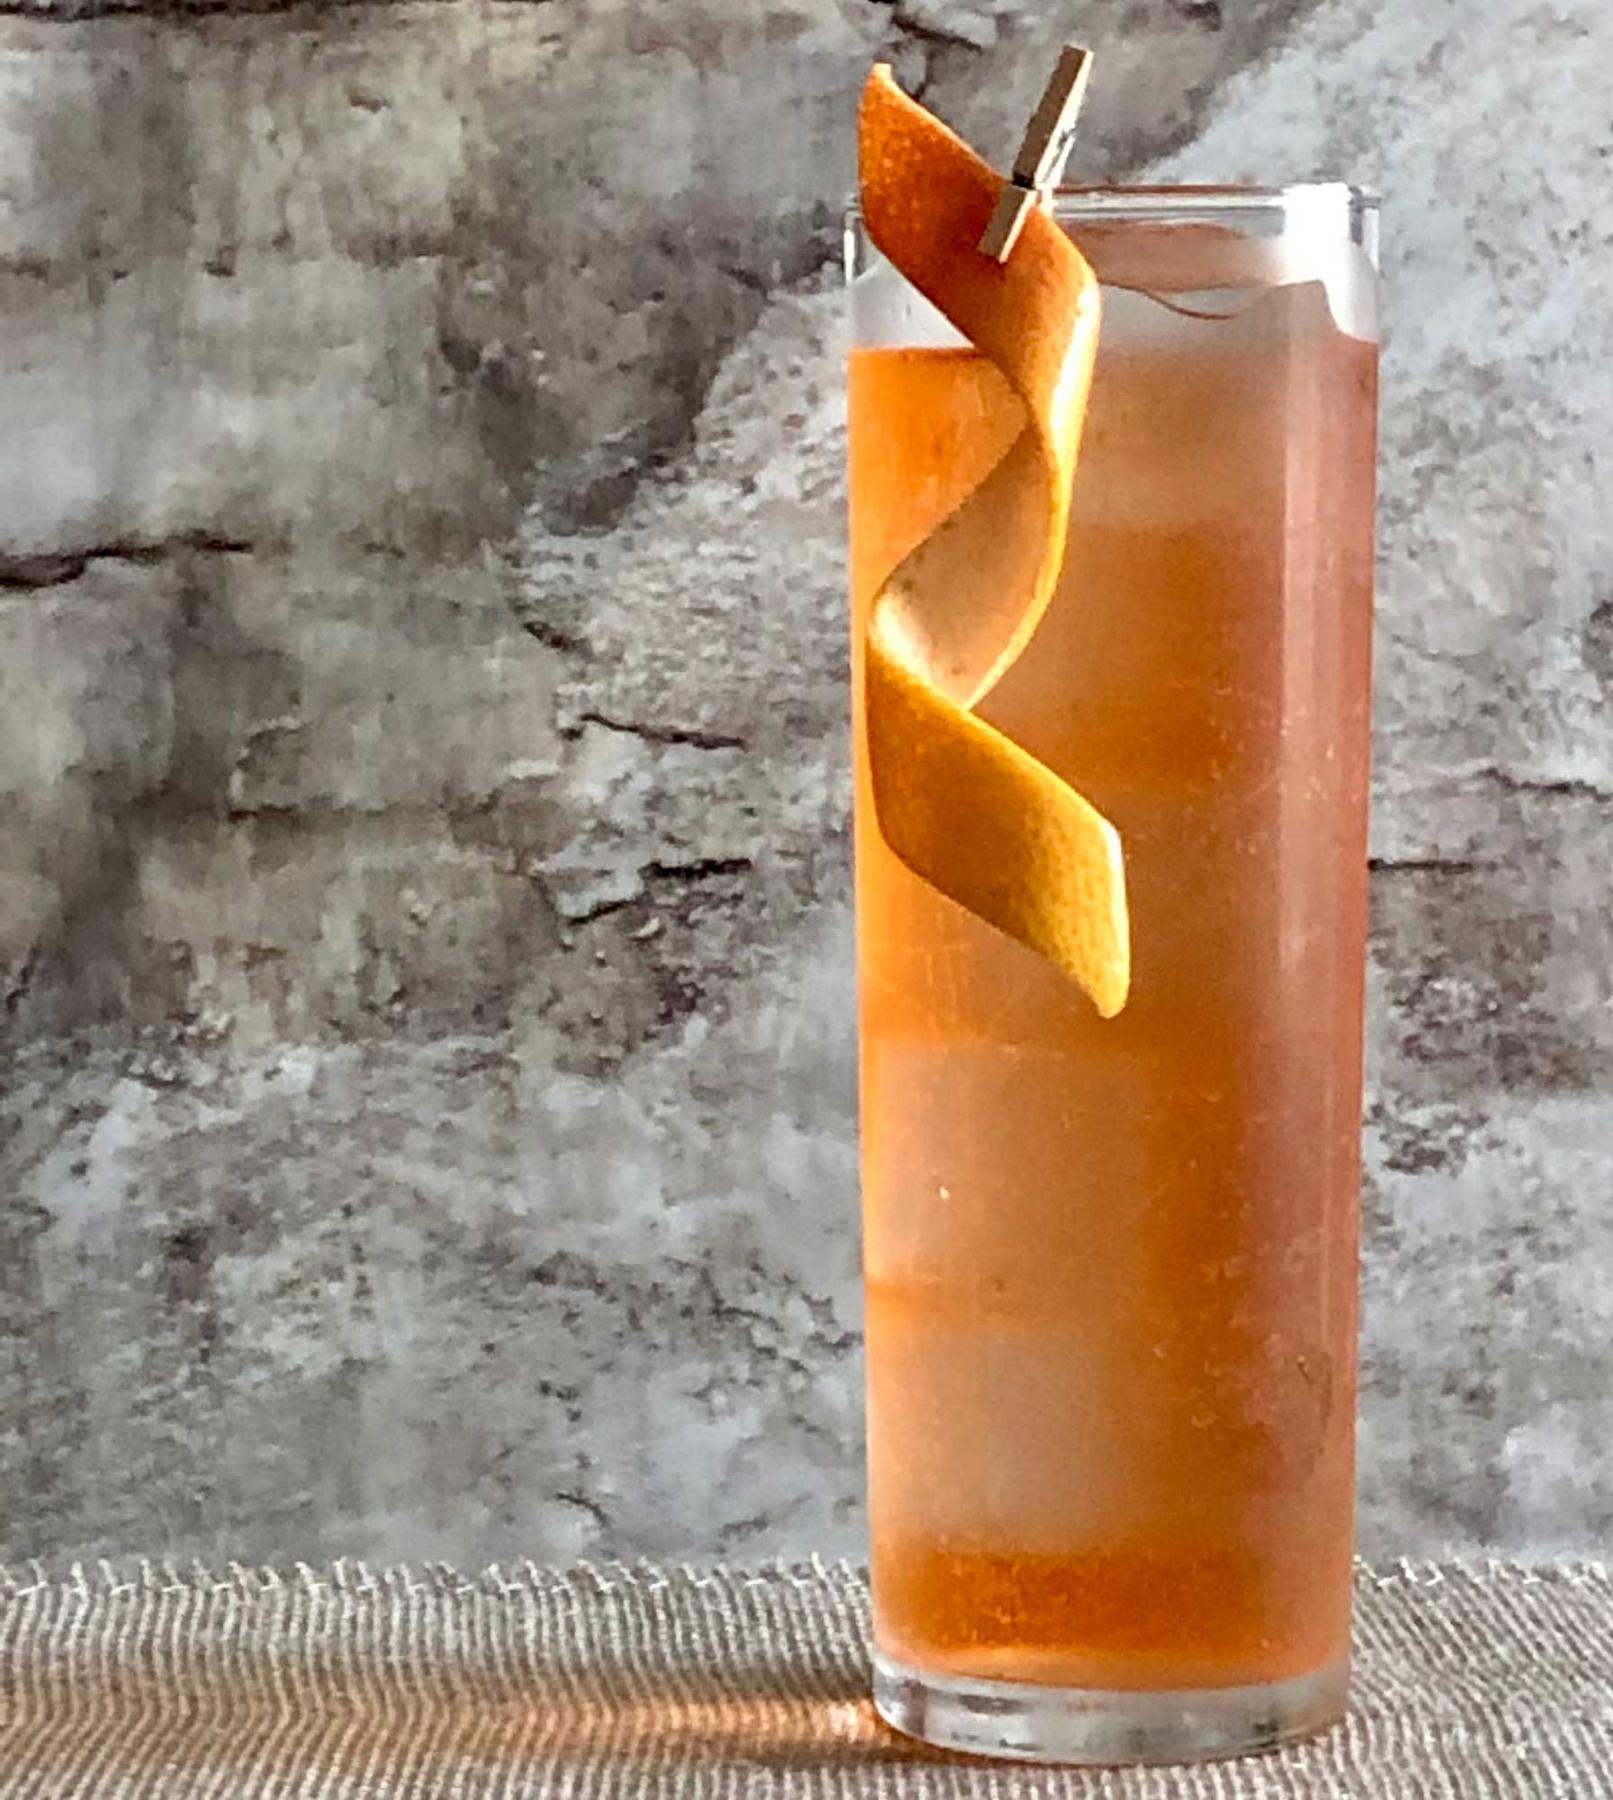 An example of the Mesa Spritz, the mixed drink (drink) featuring soda water, Dolin Dry Vermouth de Chambéry, Aperitivo Cappelletti, and grapefruit twist; photo by Lee Edwards